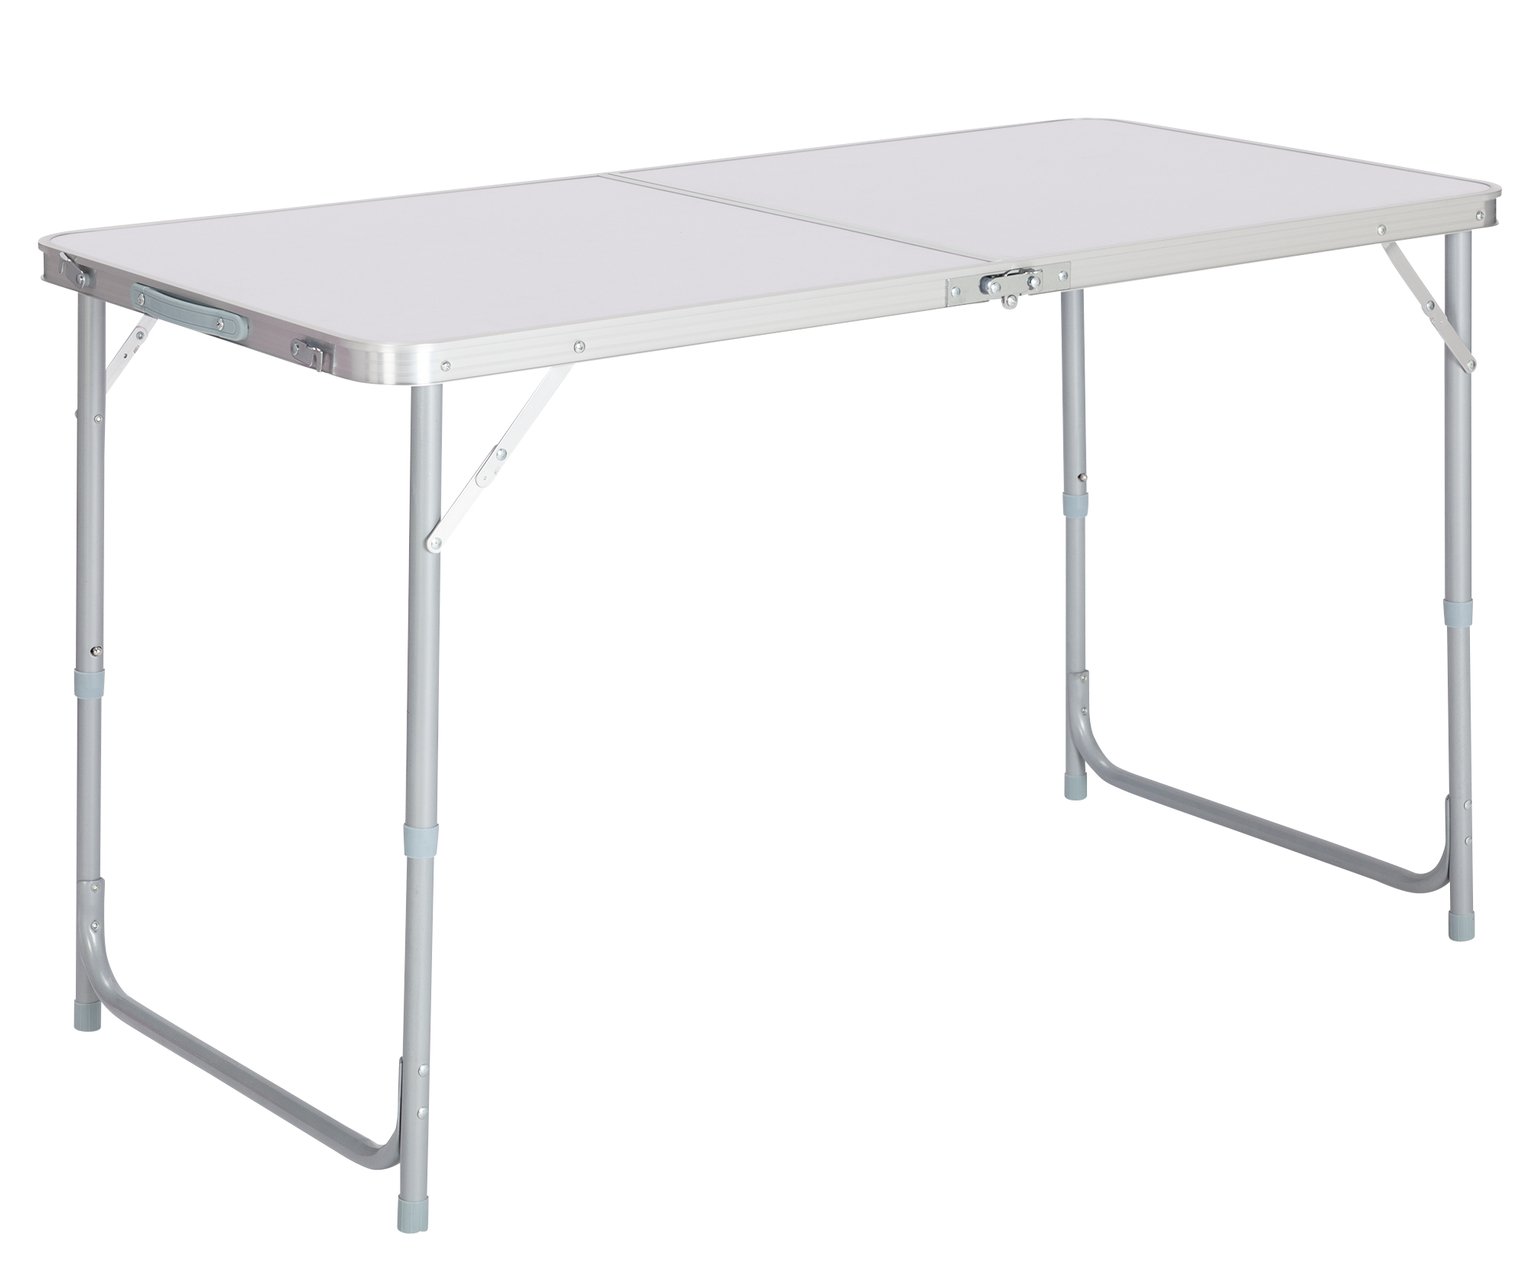 GV Pro Action Foldable Height Camping Table